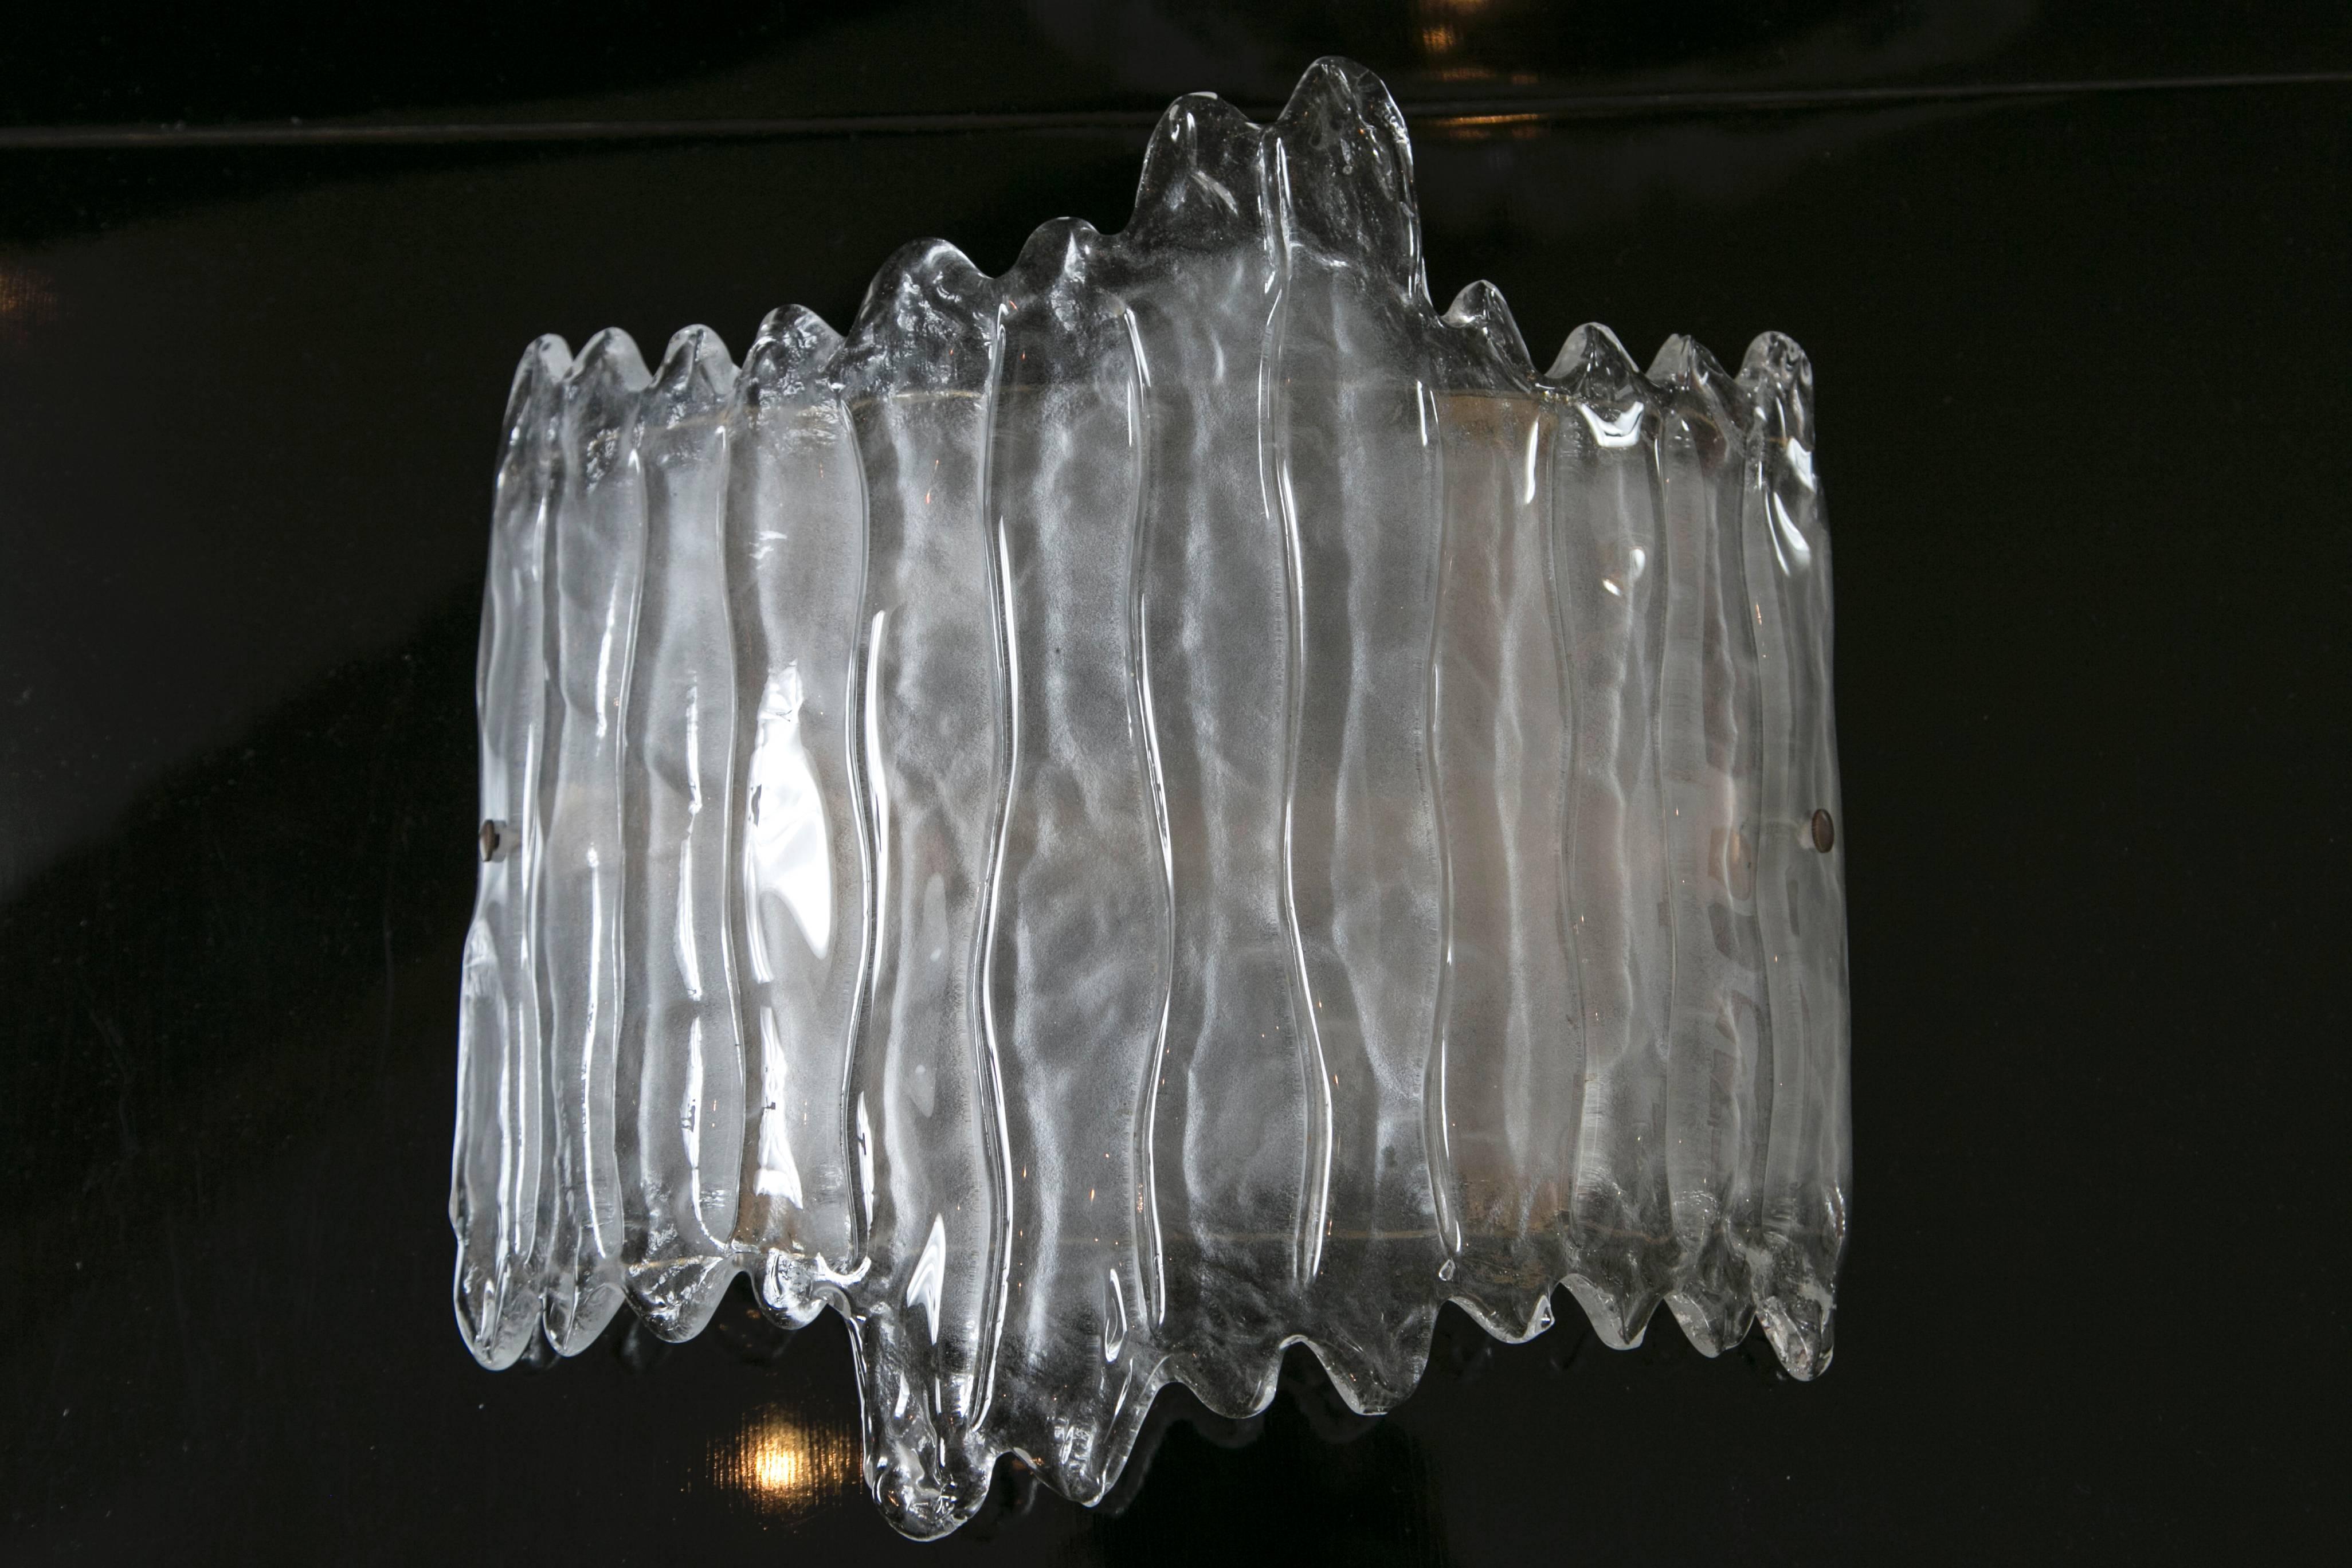 A dramatic and shimmery pair of curved demilune glass wall lights blown to appear as melting icicles, illuminated with 2 candelabra base sockets for up to 60 watts each
additional to UL certify
 